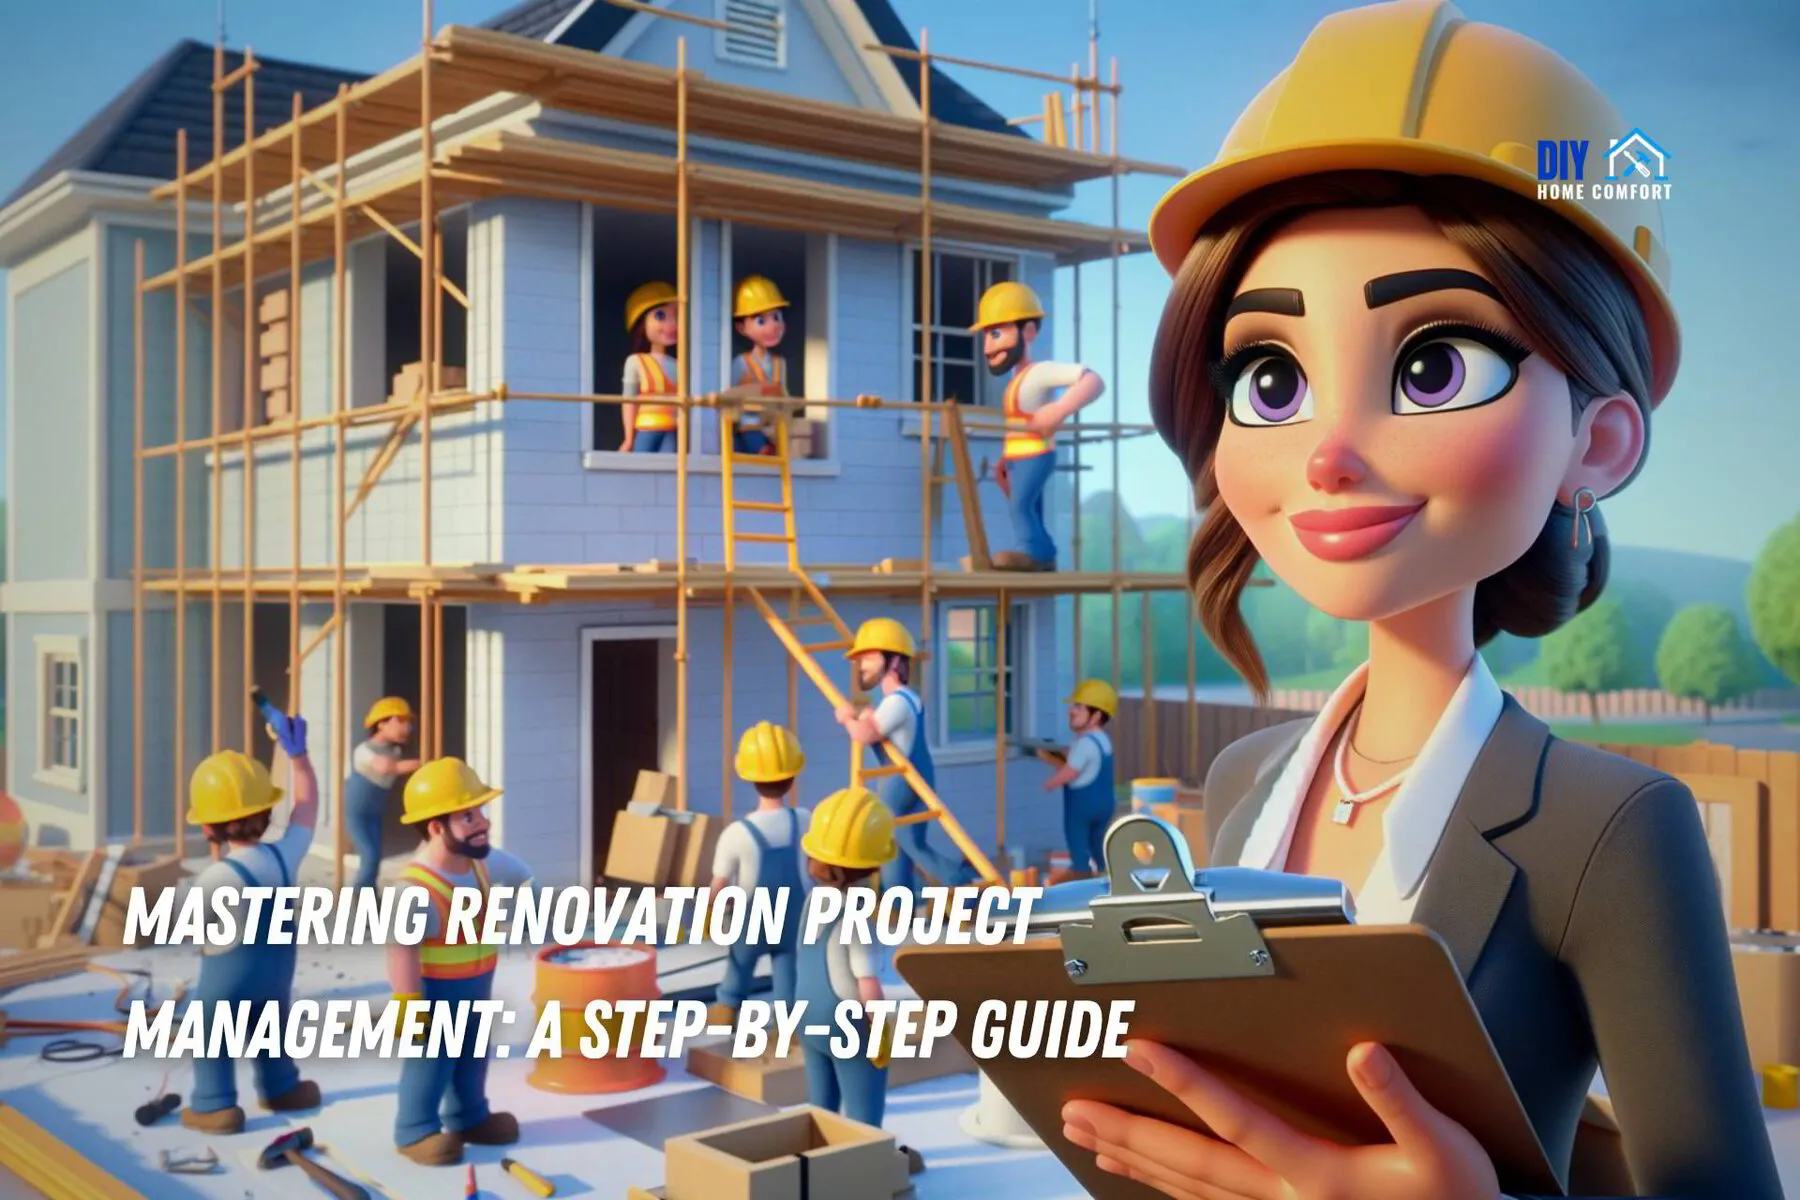 Mastering Renovation Project Management: A Step-by-Step Guide | DIY Home Comfort